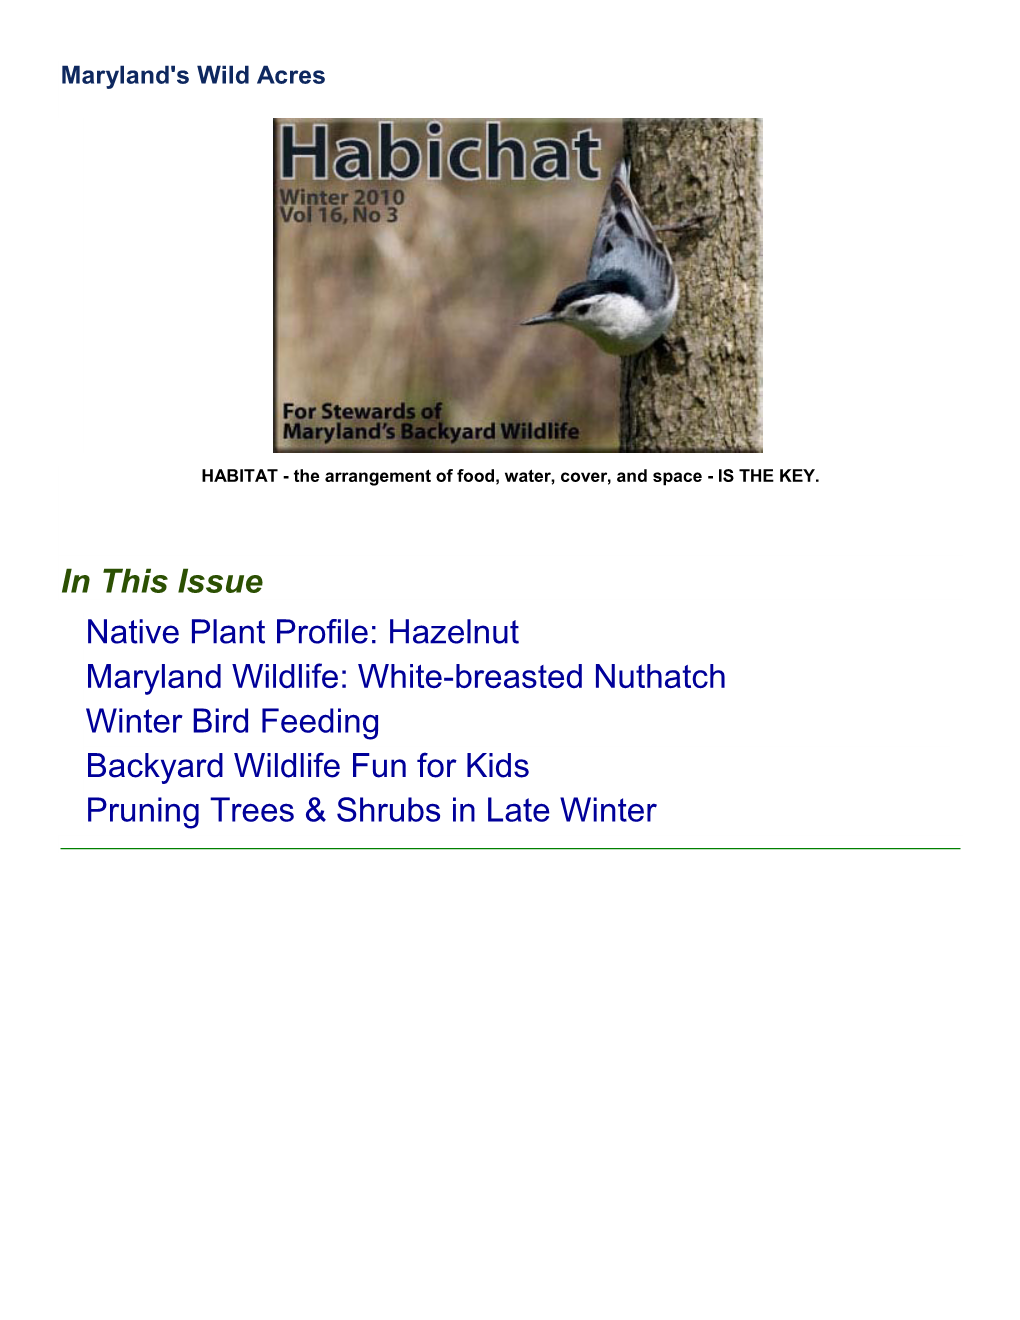 White-Breasted Nuthatch Winter Bird Feeding Backyard Wildlife Fun for Kids Pruning Trees & Shrubs in Late Winter